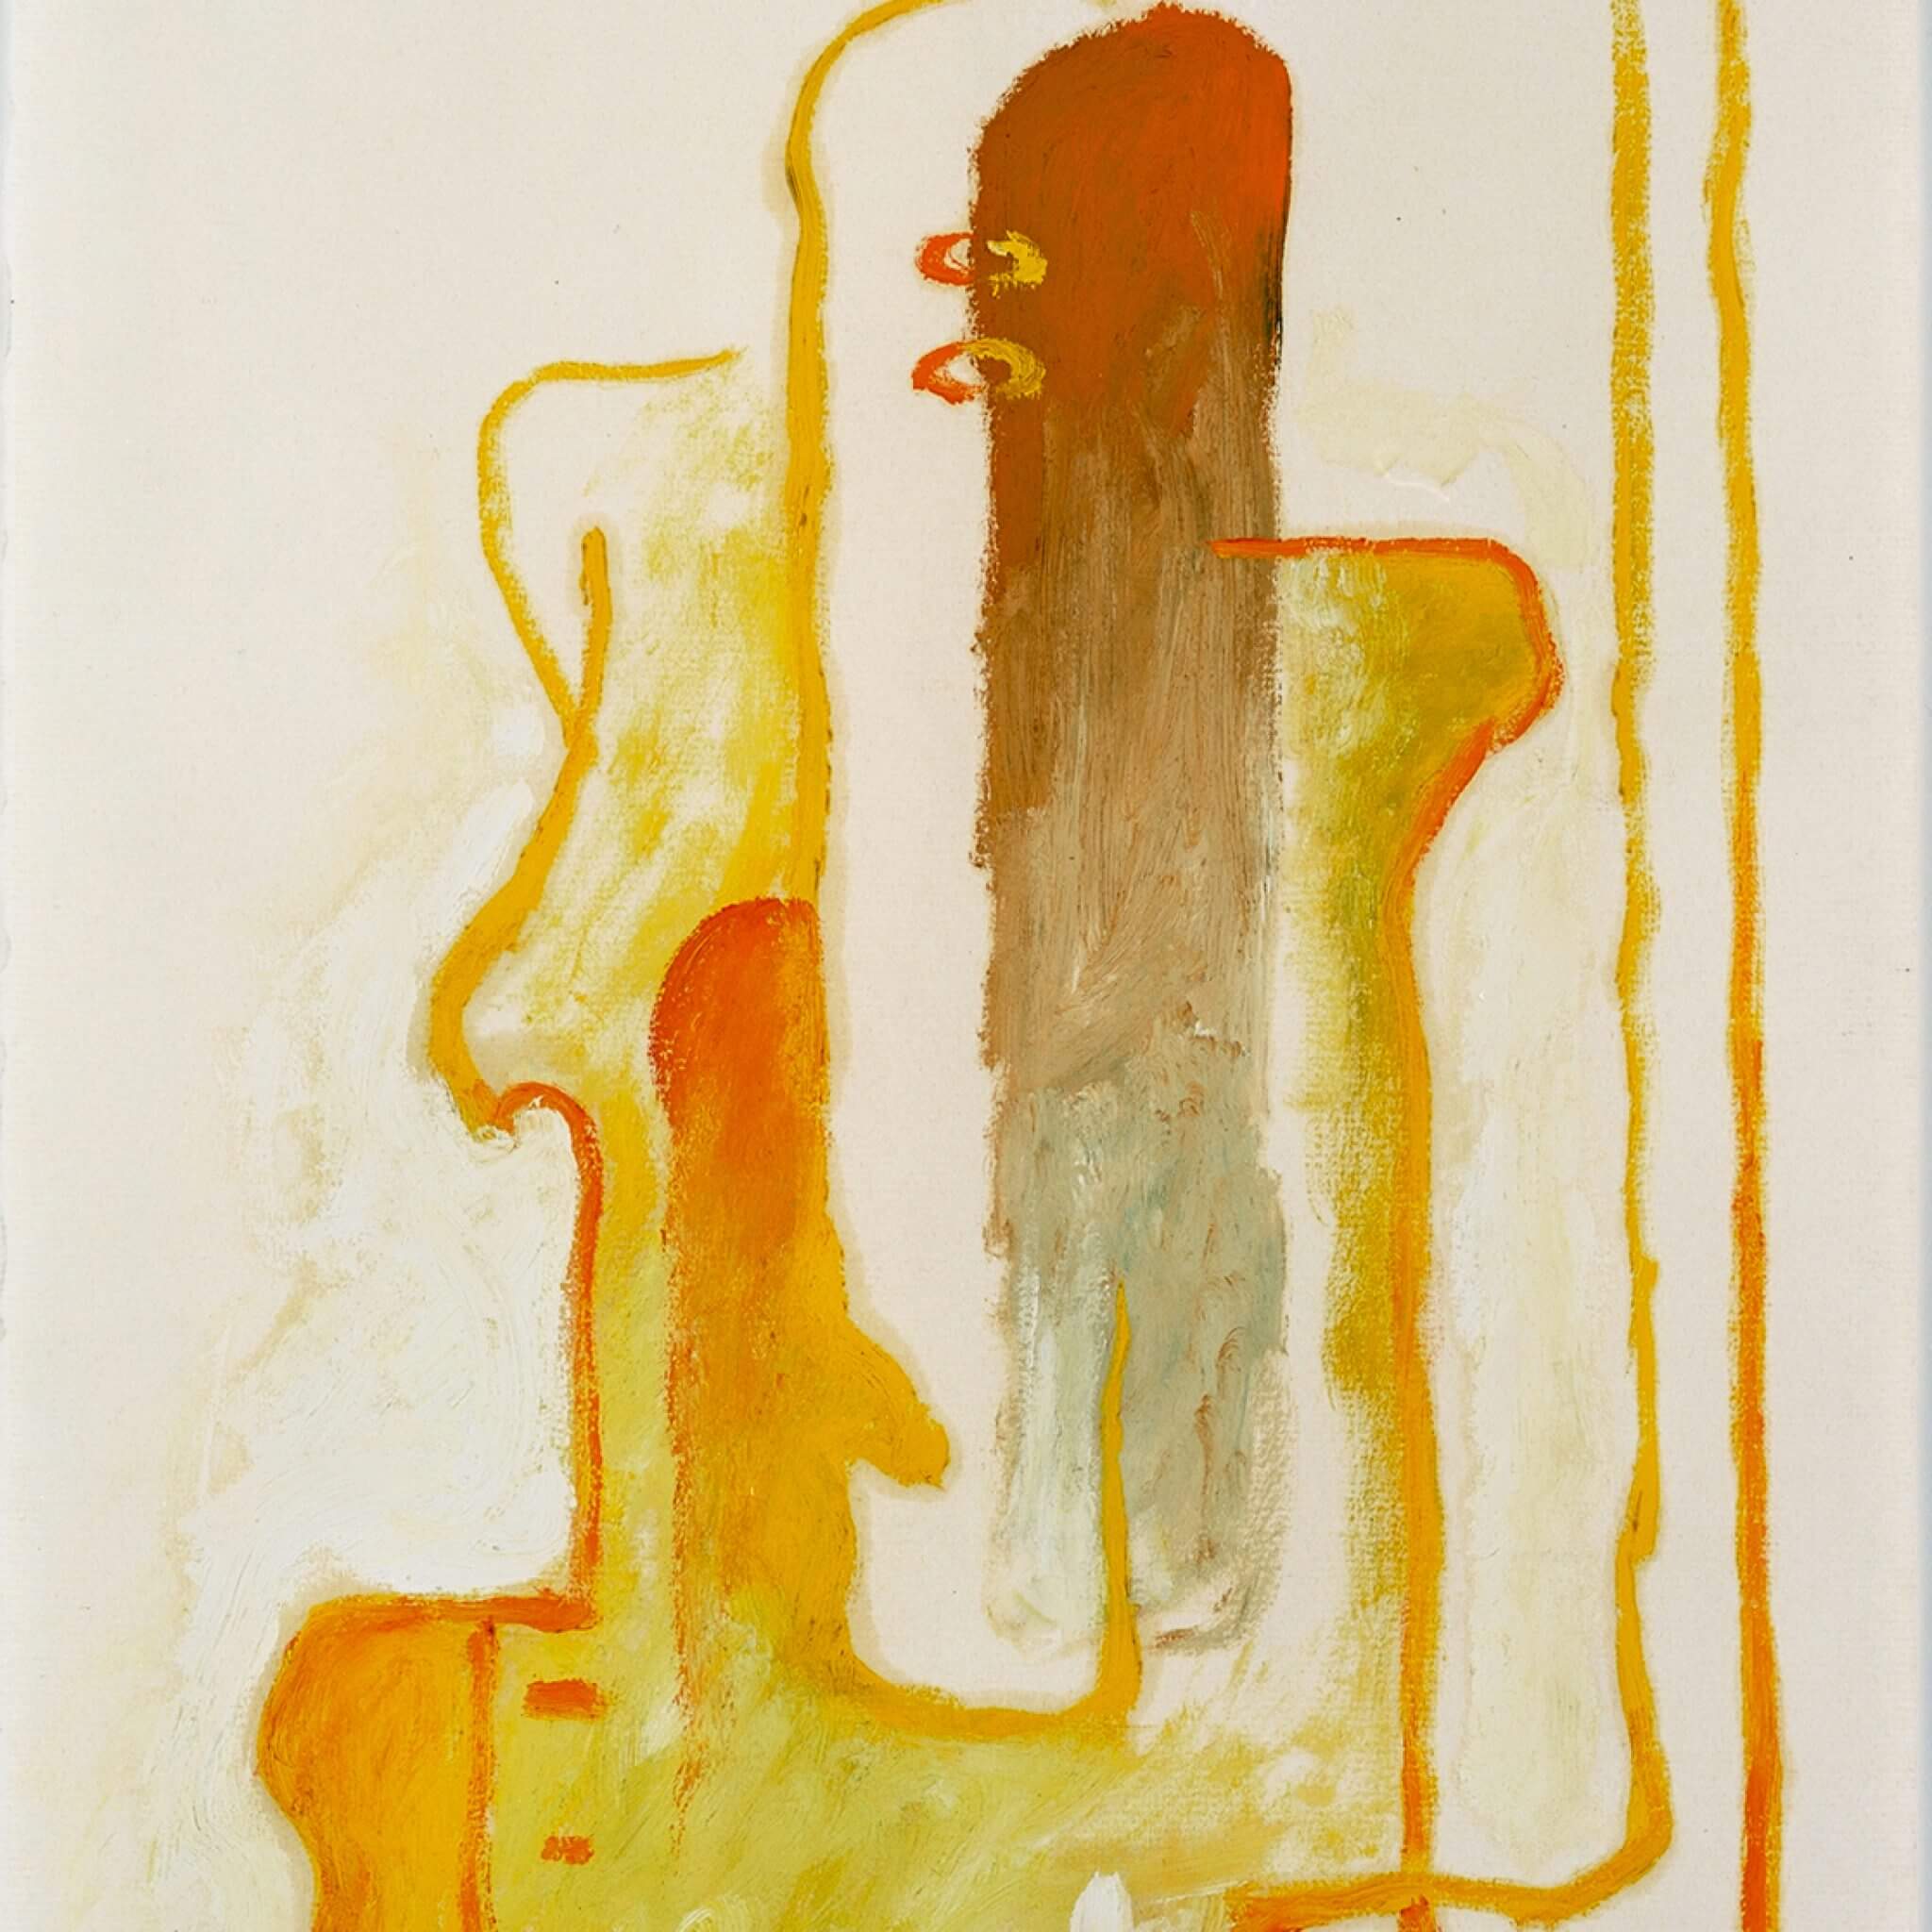 Abstract oil painting on paper with red, orange, yellow, and tan paint